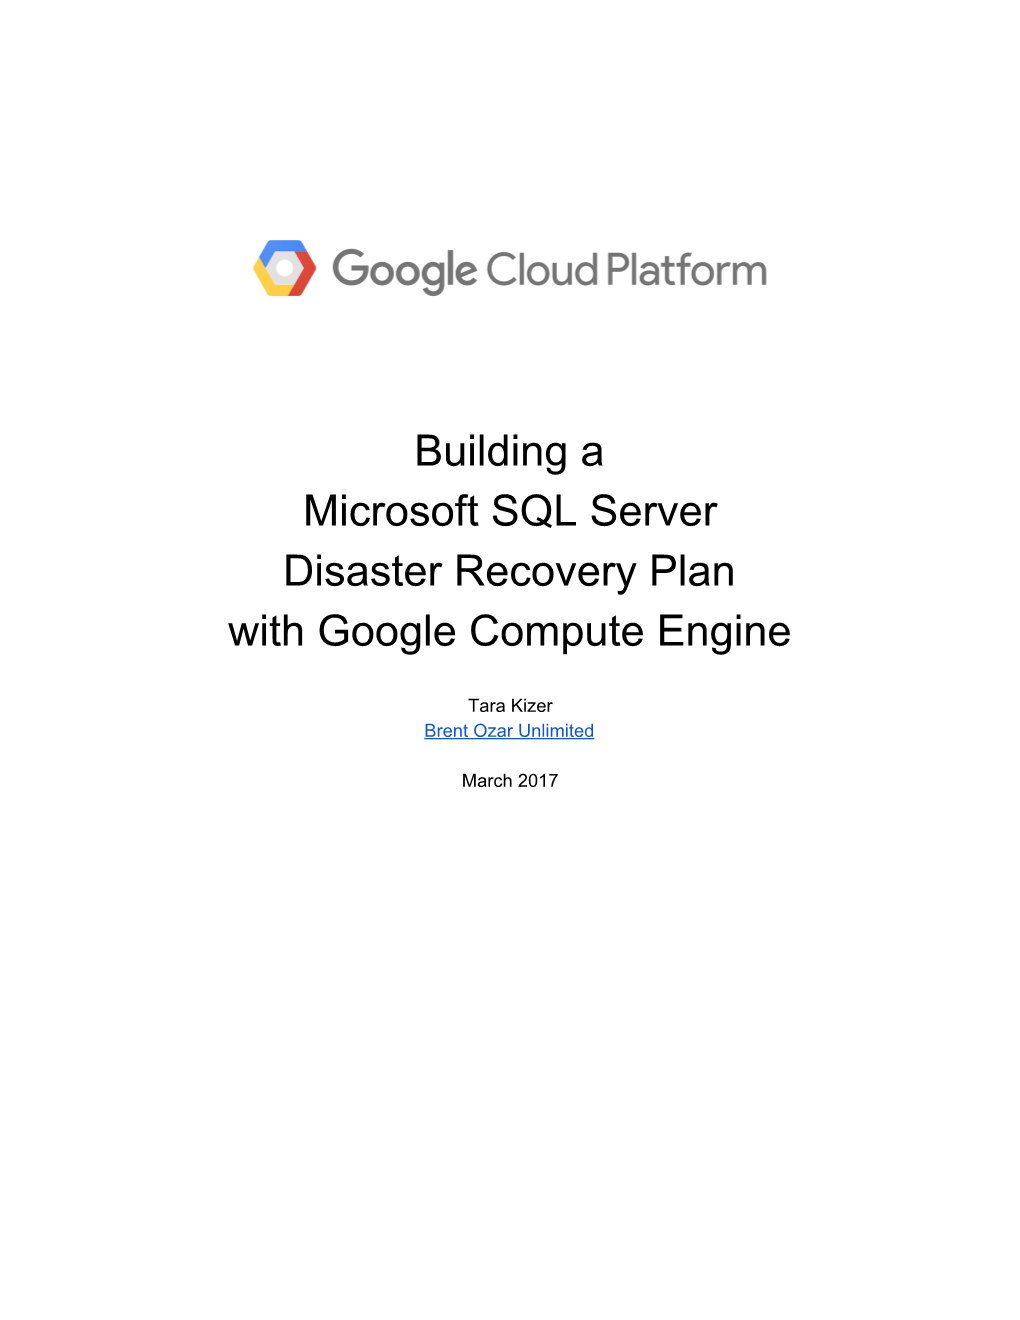 Building a Microsoft SQL Server Disaster Recovery Plan with Google Compute Engine